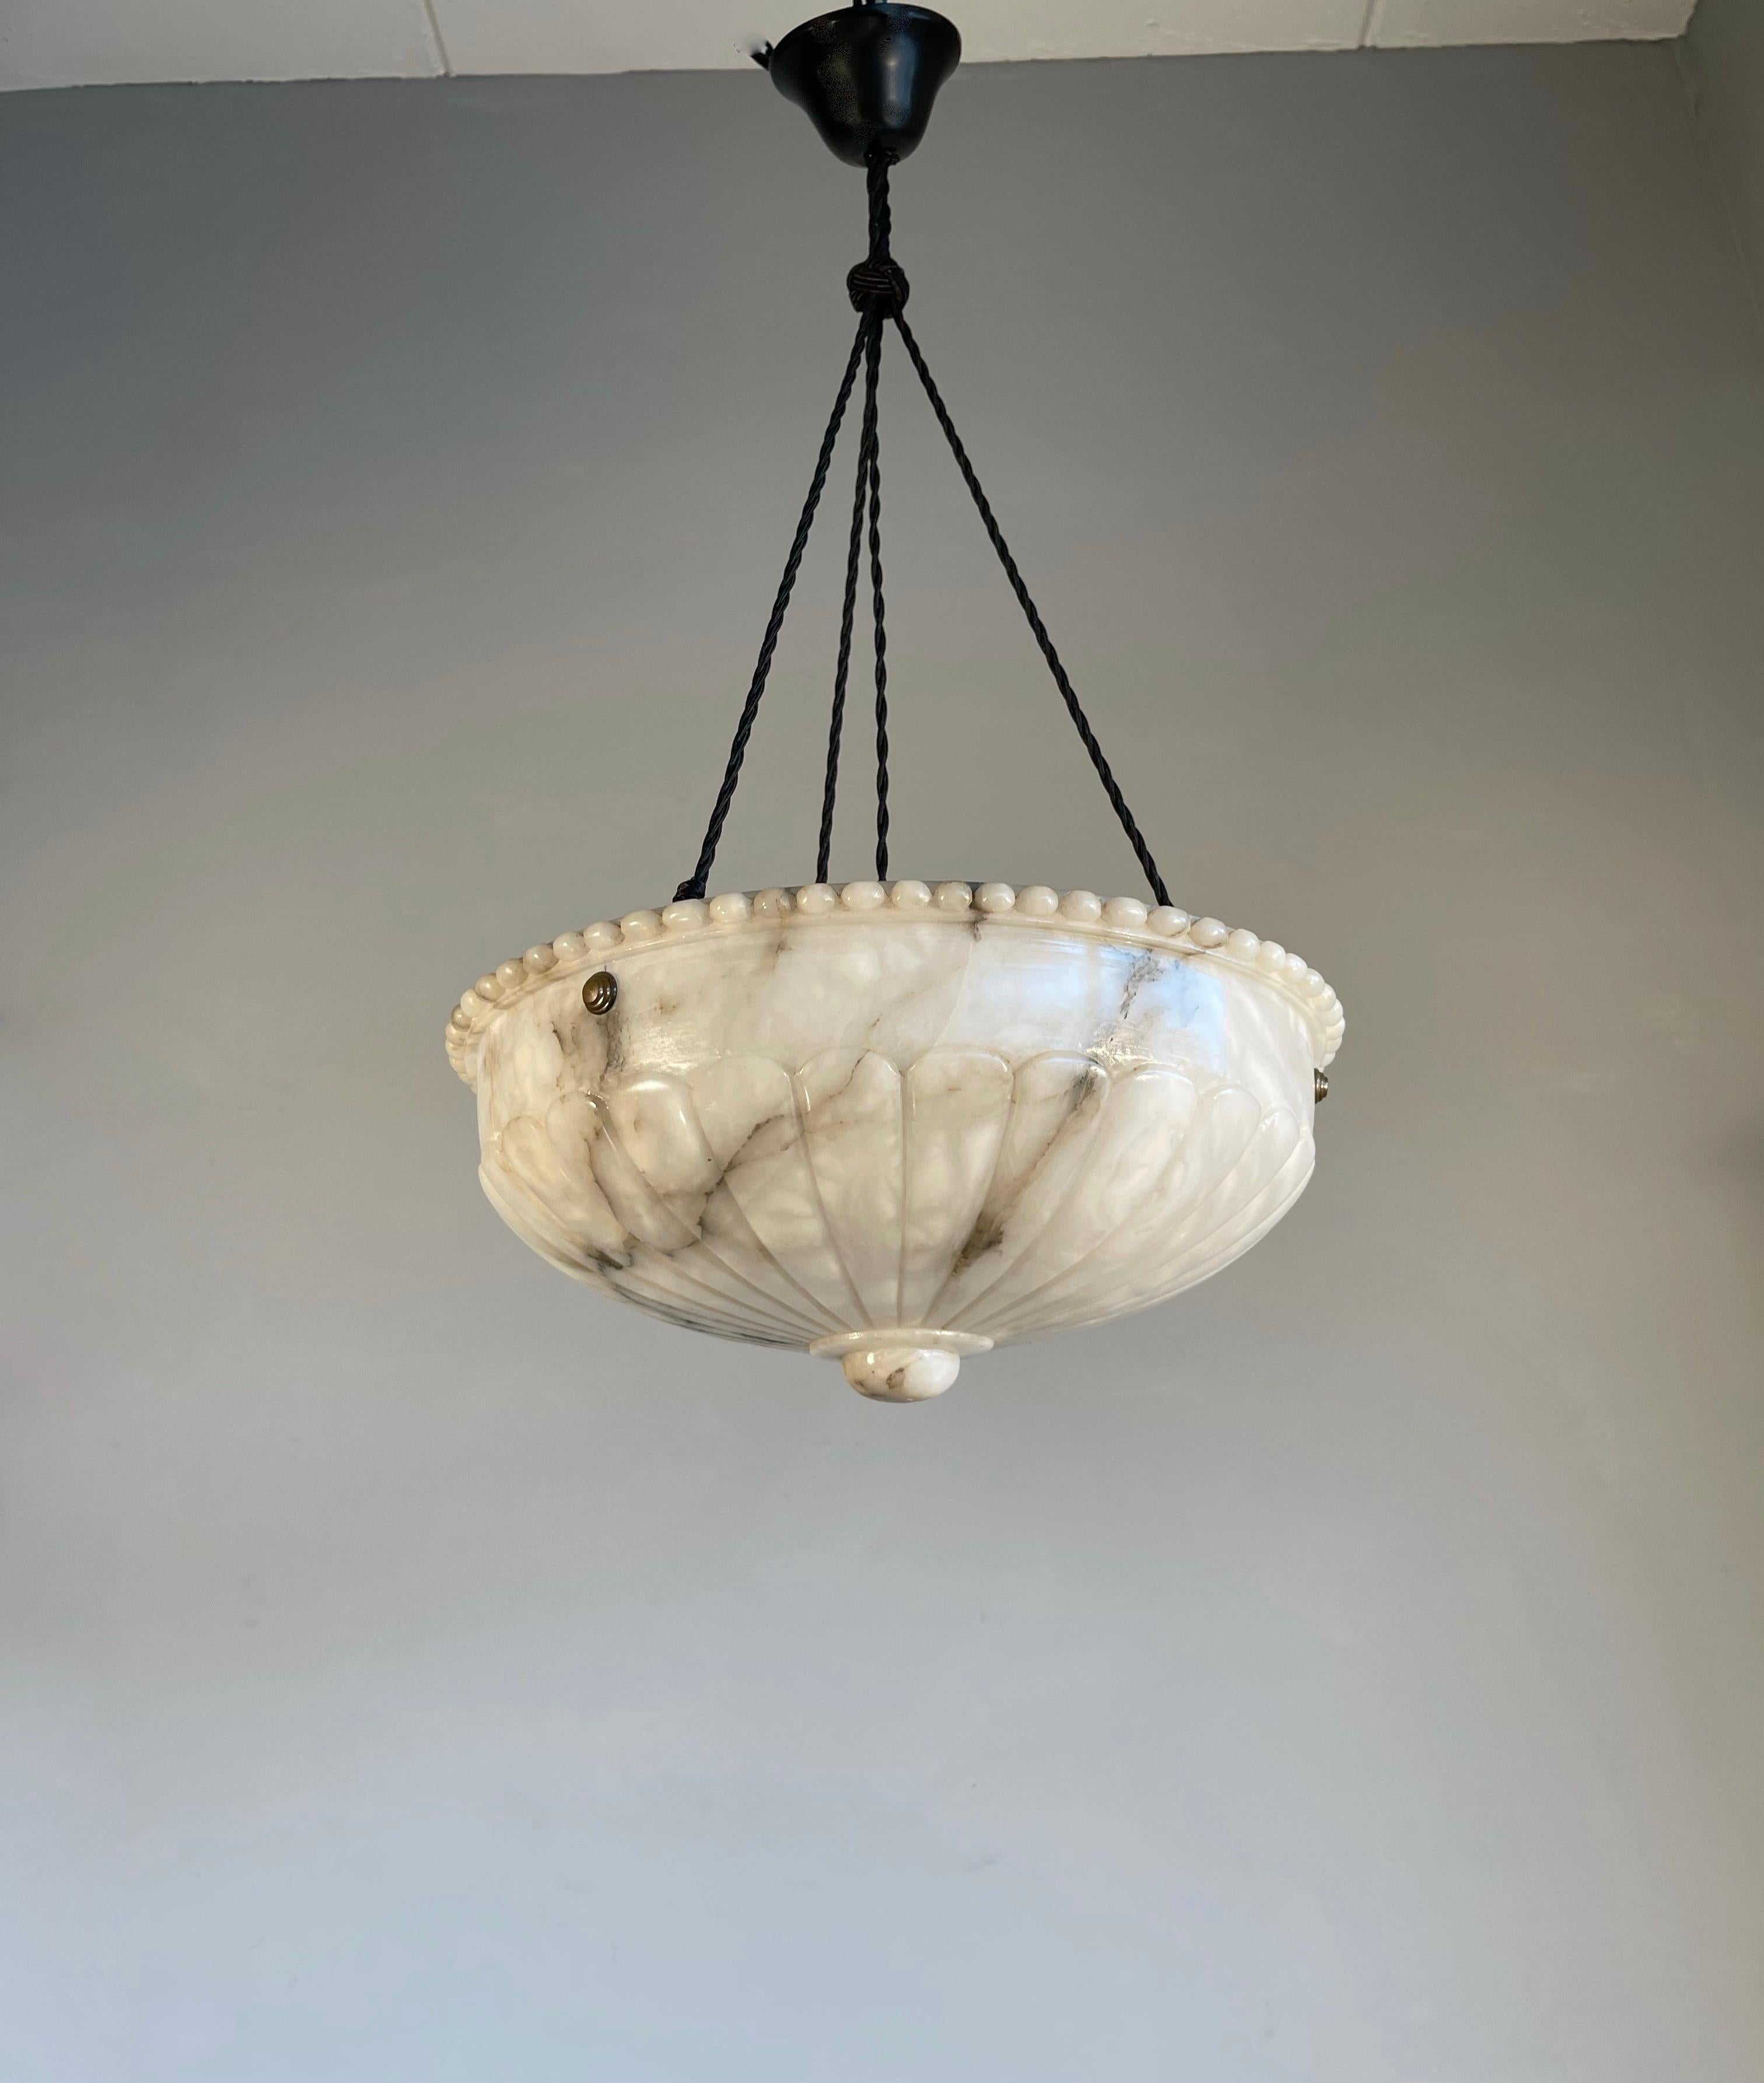 Top class light fixture with a stunning alabaster shade and black rope.

Thanks to its unique design and good size this alabaster chandelier will light up both your days and evenings. The stunning original shade is made complete with a blackened